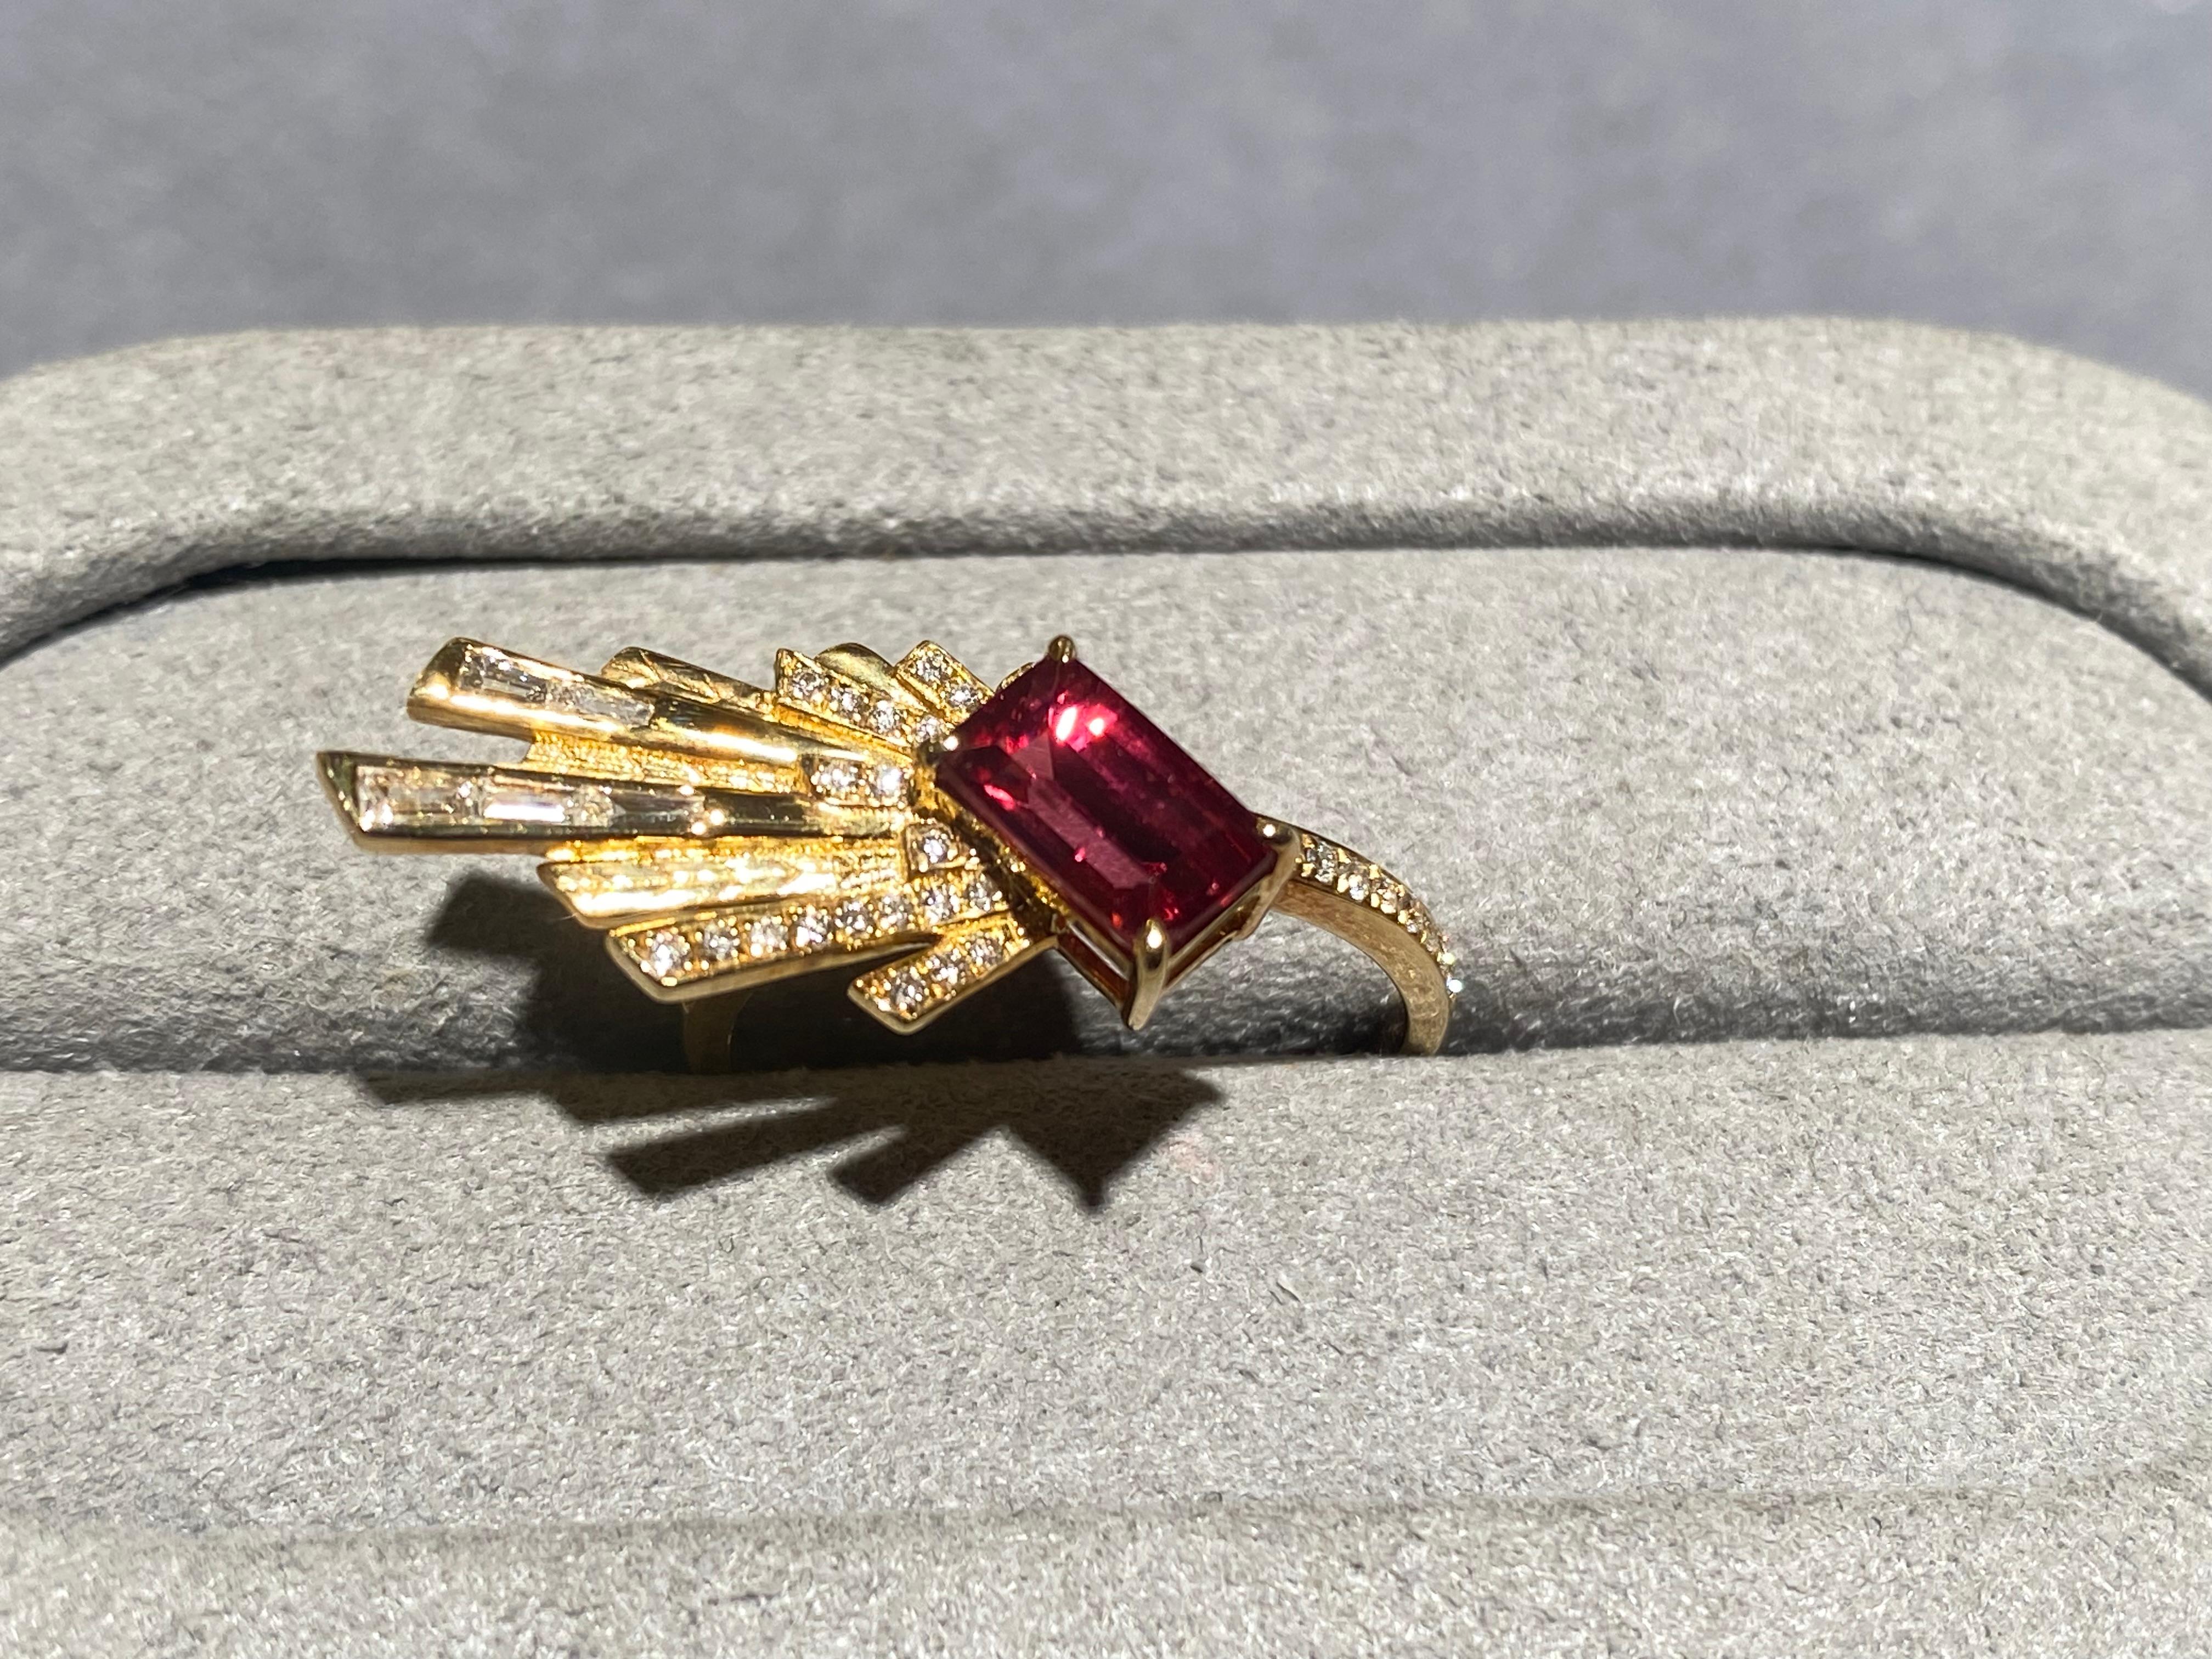 A red spinel and diamond ring in 18k yellow gold. The rectangle spinel is set at an angle  to the ring band. There are fireworks-like structure coming out from the tourmaline and some of the structures are set with diamonds. This is a very simple